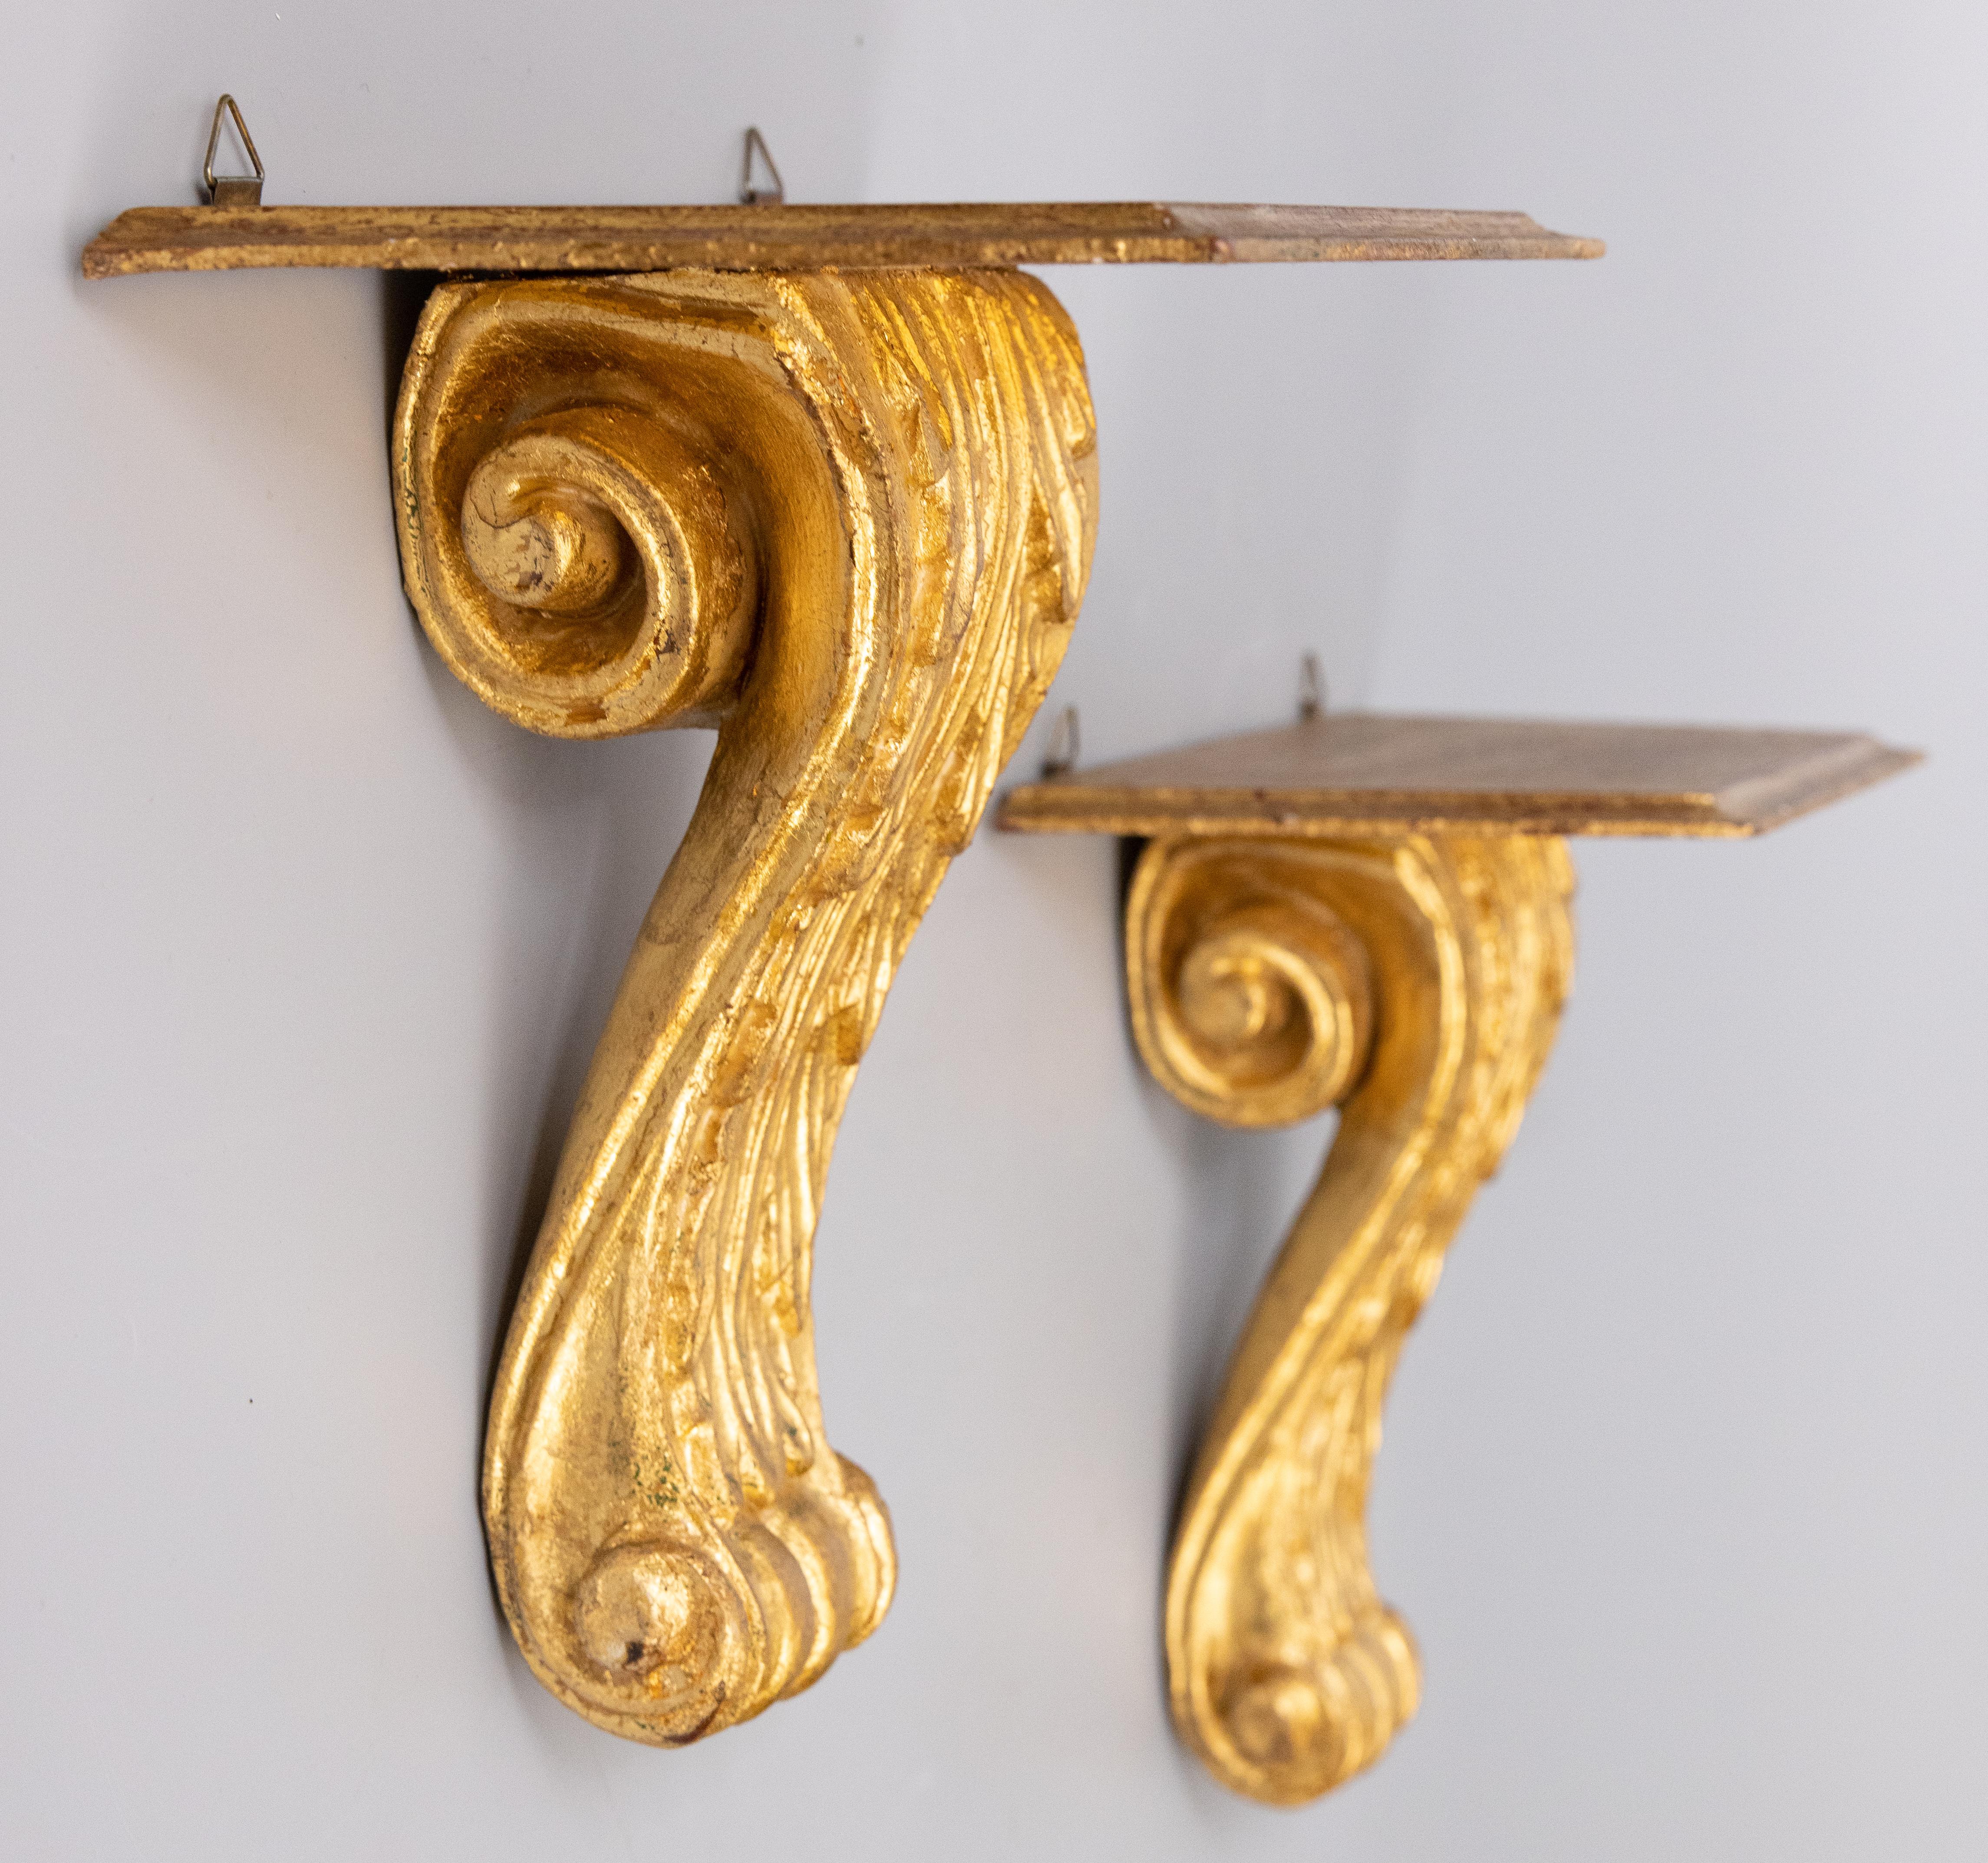 A lovely pair of vintage midcentury Italian neoclassical style gilded wood wall brackets shelves with hand carved acanthus leaves design. Marked 